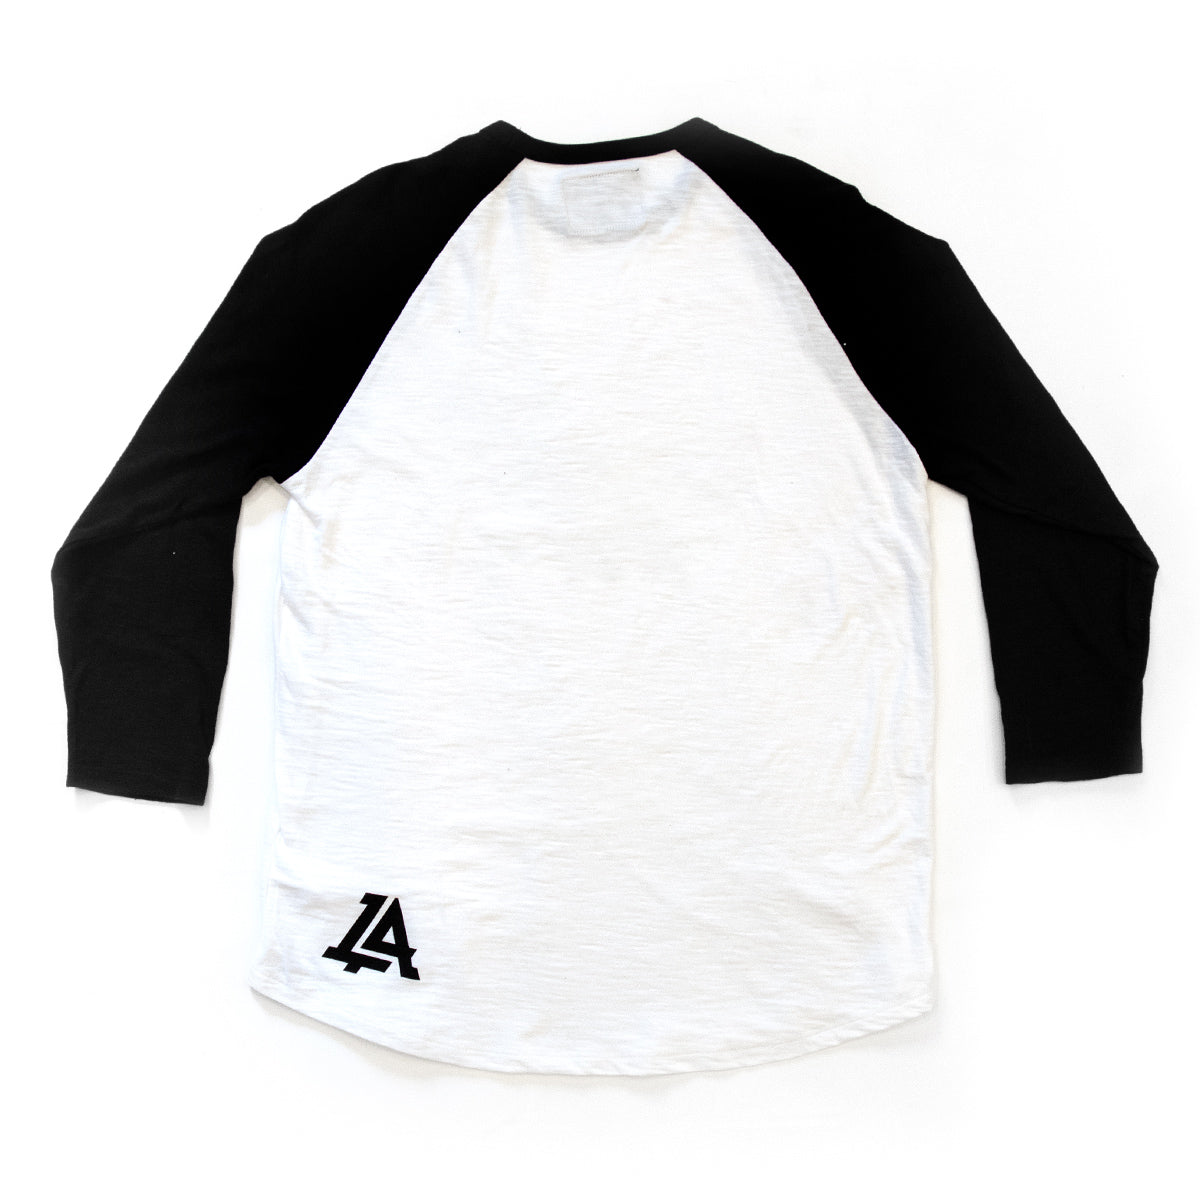 Lost Art Canada - black and white LOST monogram baseball tee back view